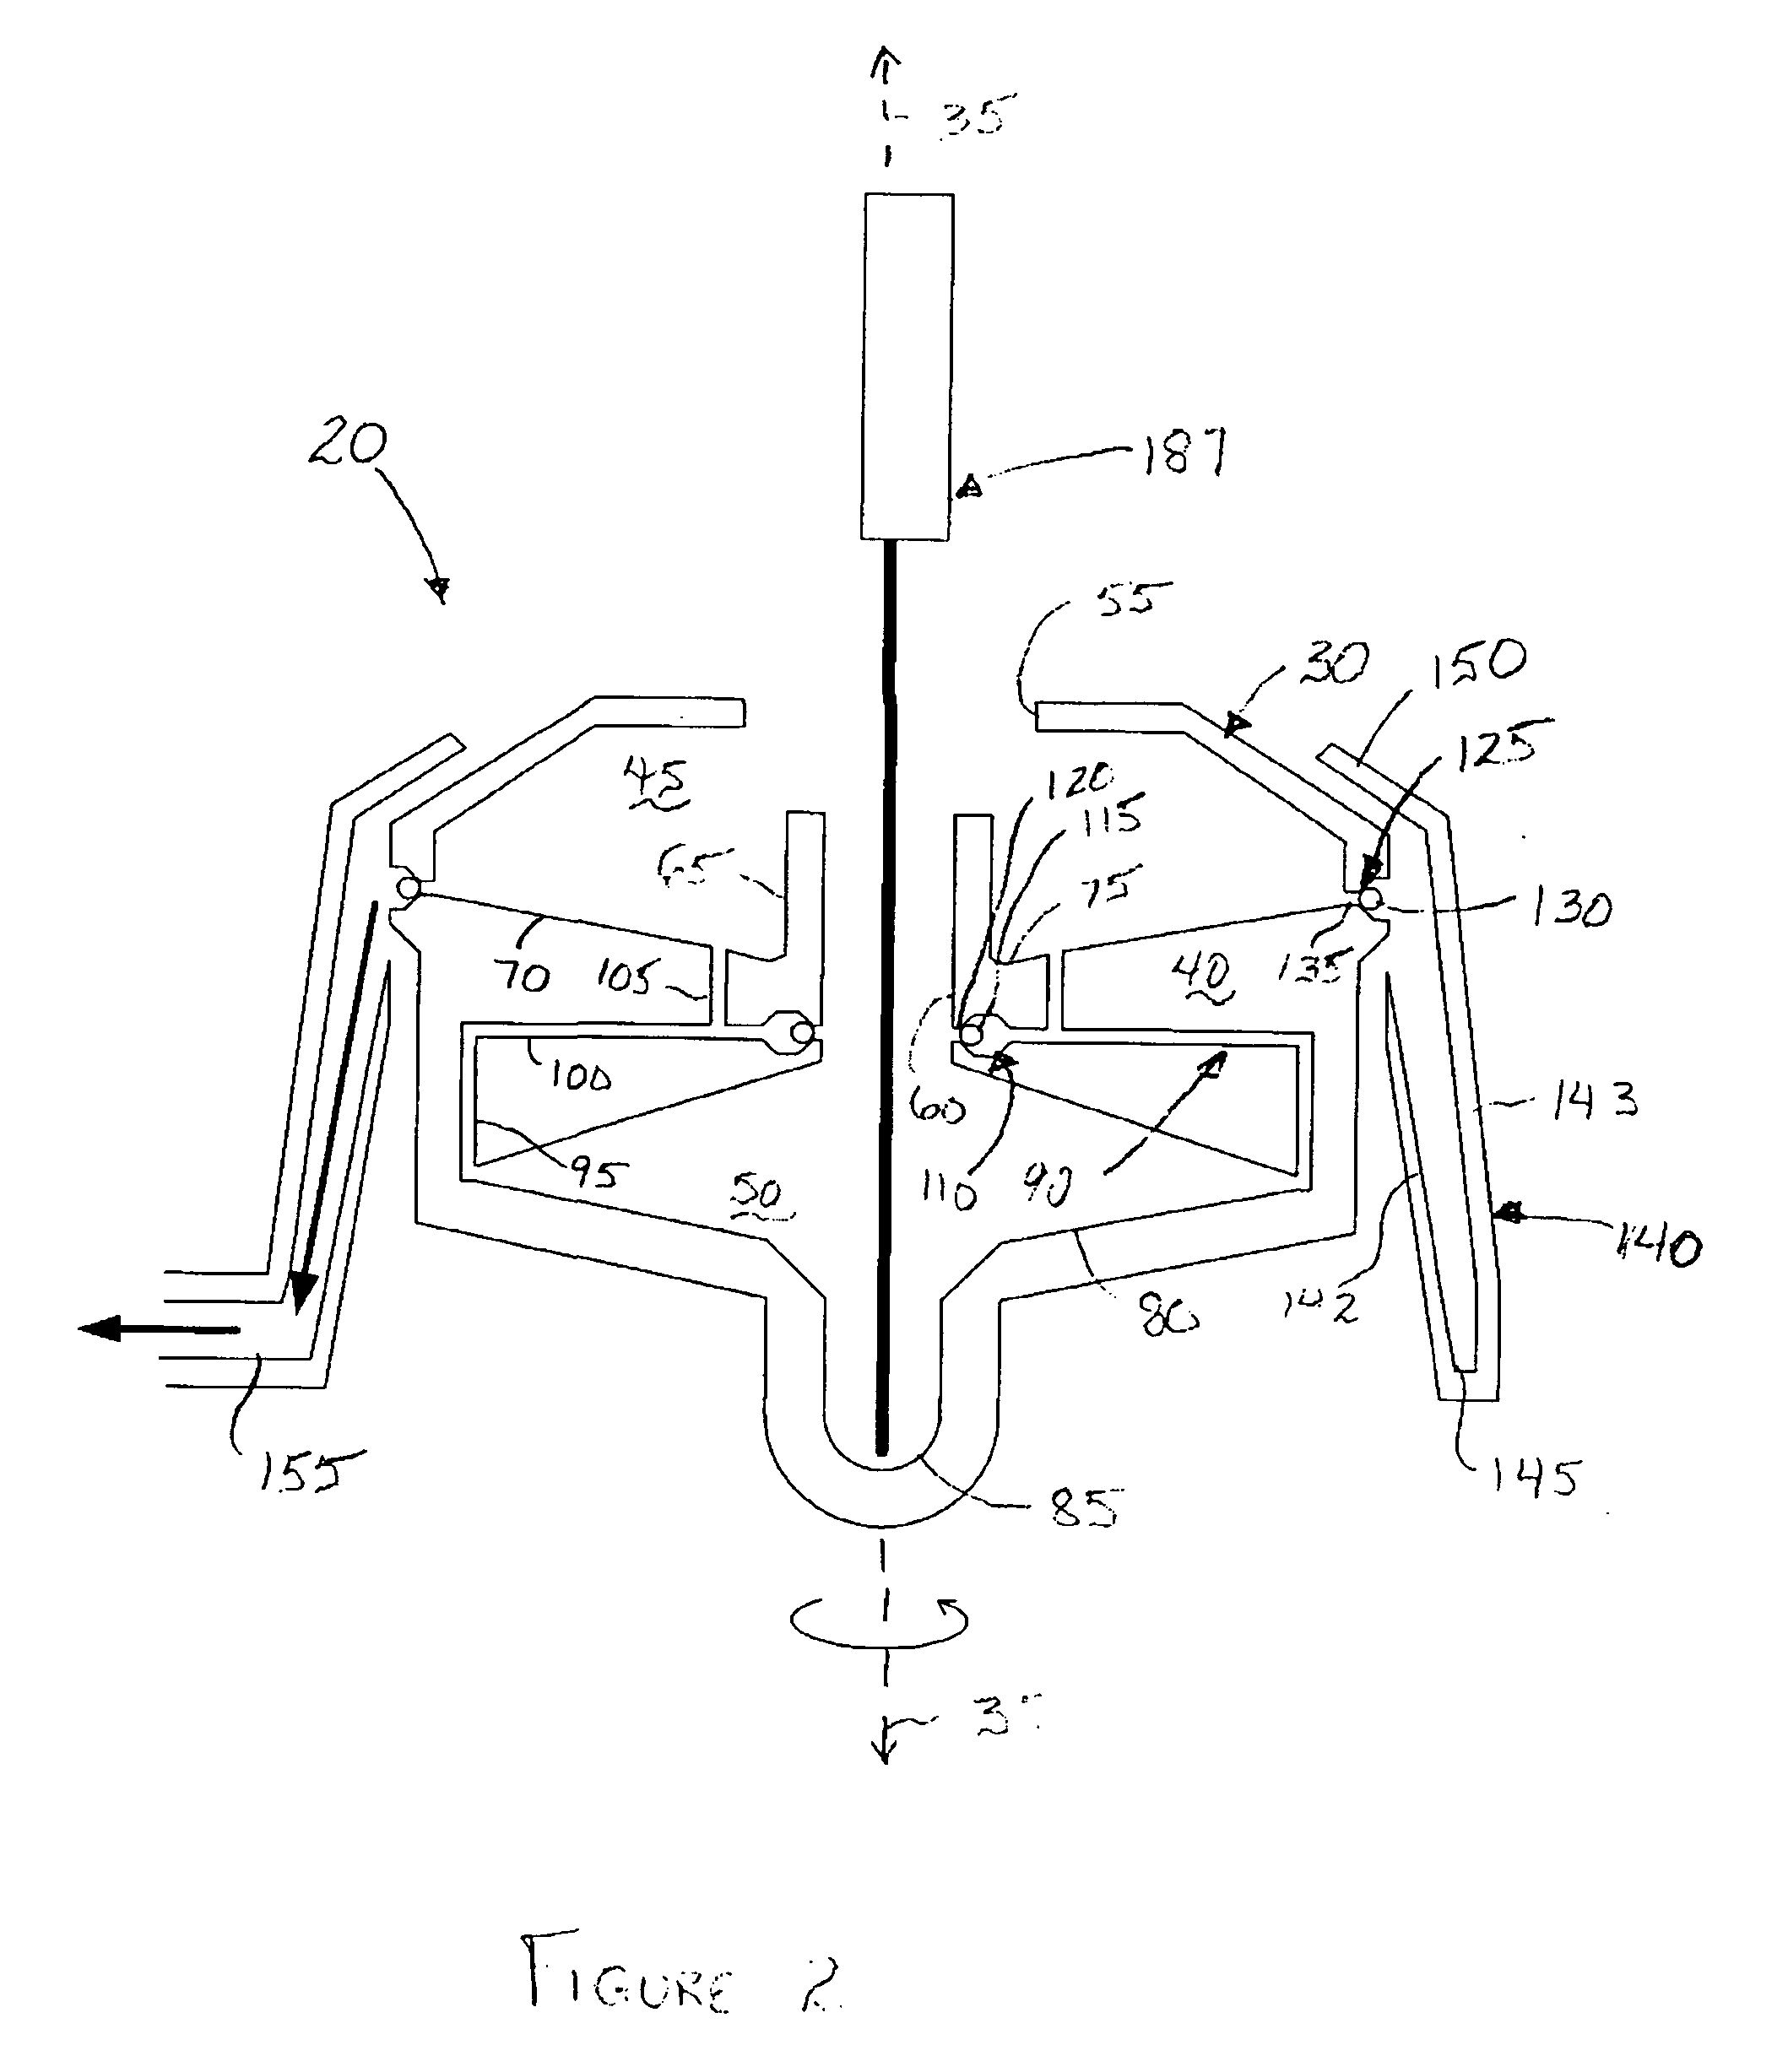 Sample preparation system for a laboratory apparatus